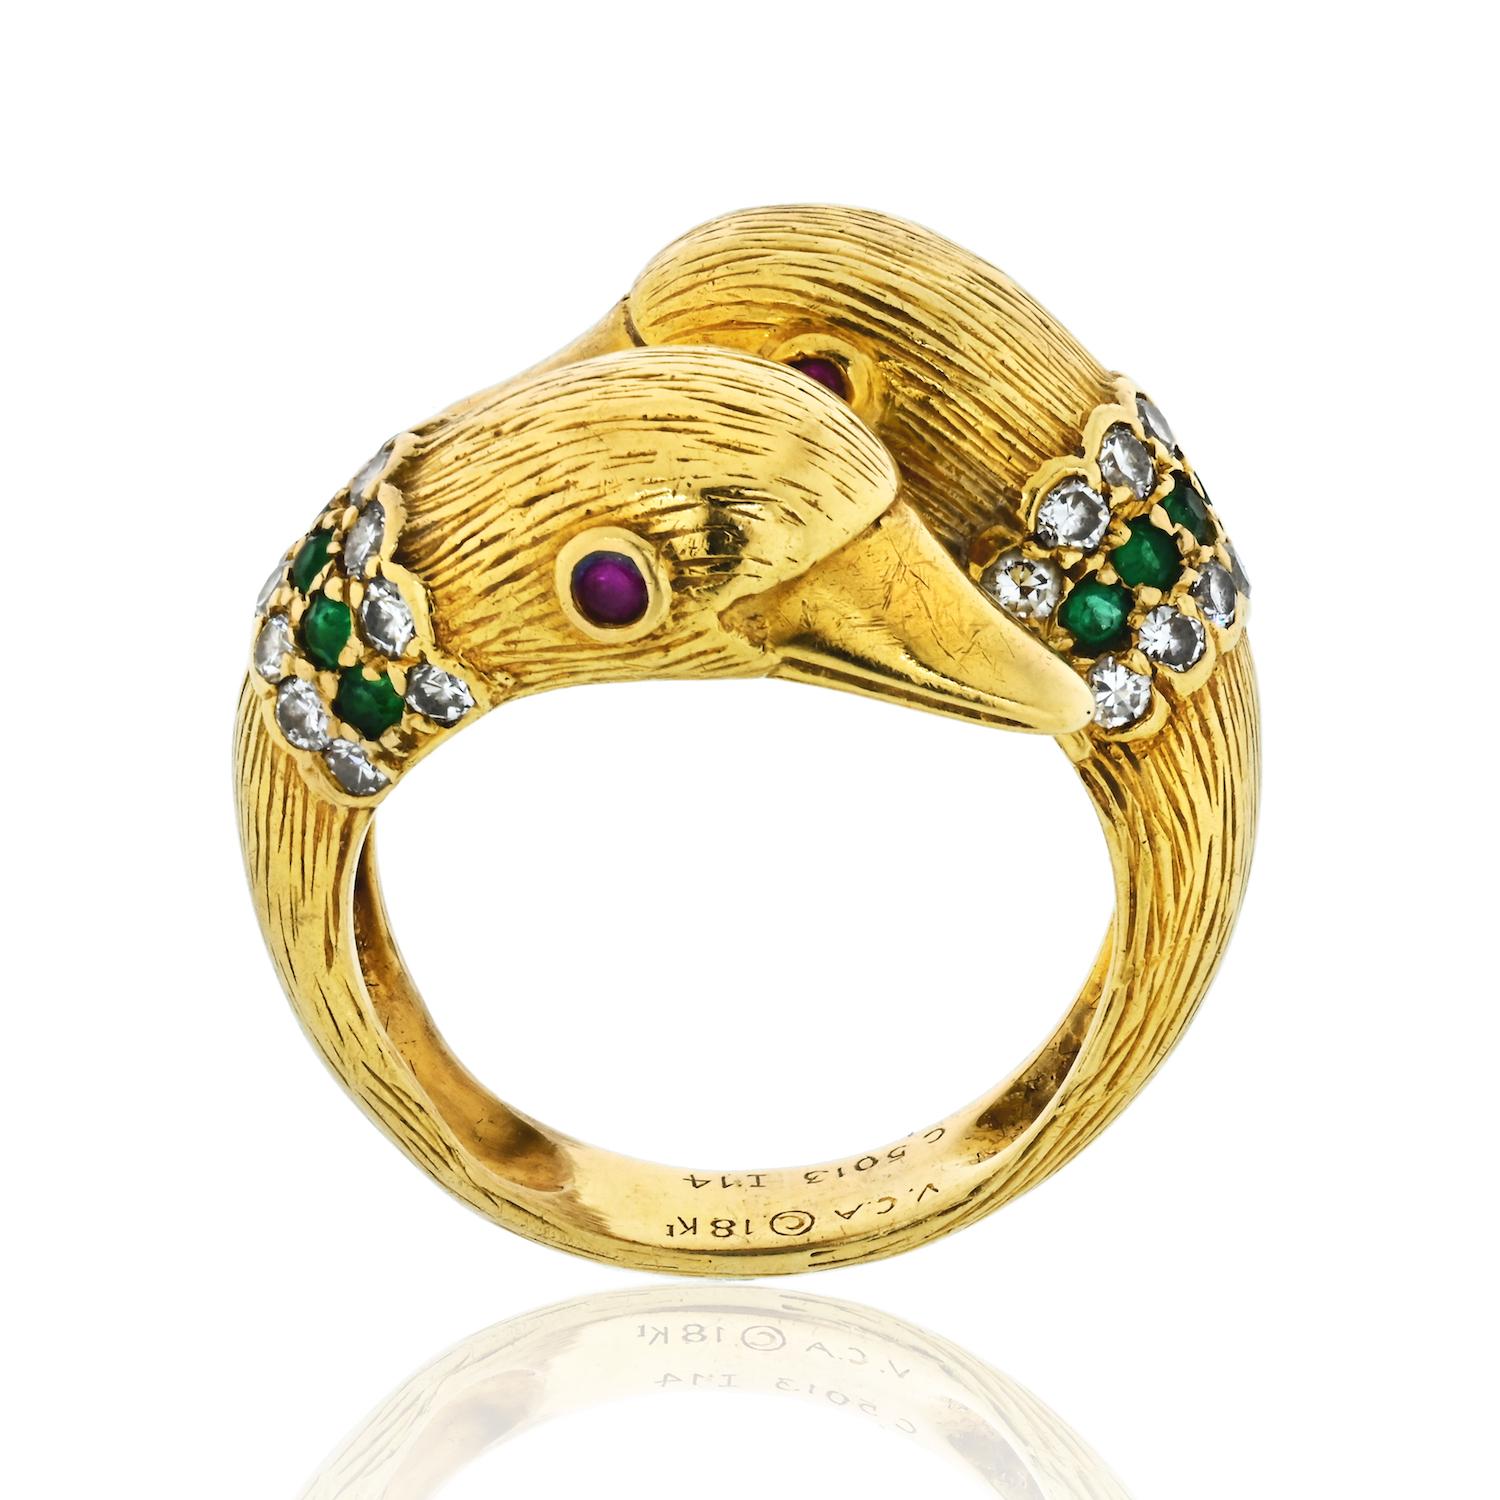 Vintage Van Cleef & Arpels Gold Twin Duck Head Crossover Ring. Set with circular-cut diamonds, emeralds and rubies. Signed VCA, numbered, French hallmarks and marker's marks. Grafted in 18k yellow gold. Weight: 9.20 grams. Ring size 7. Great